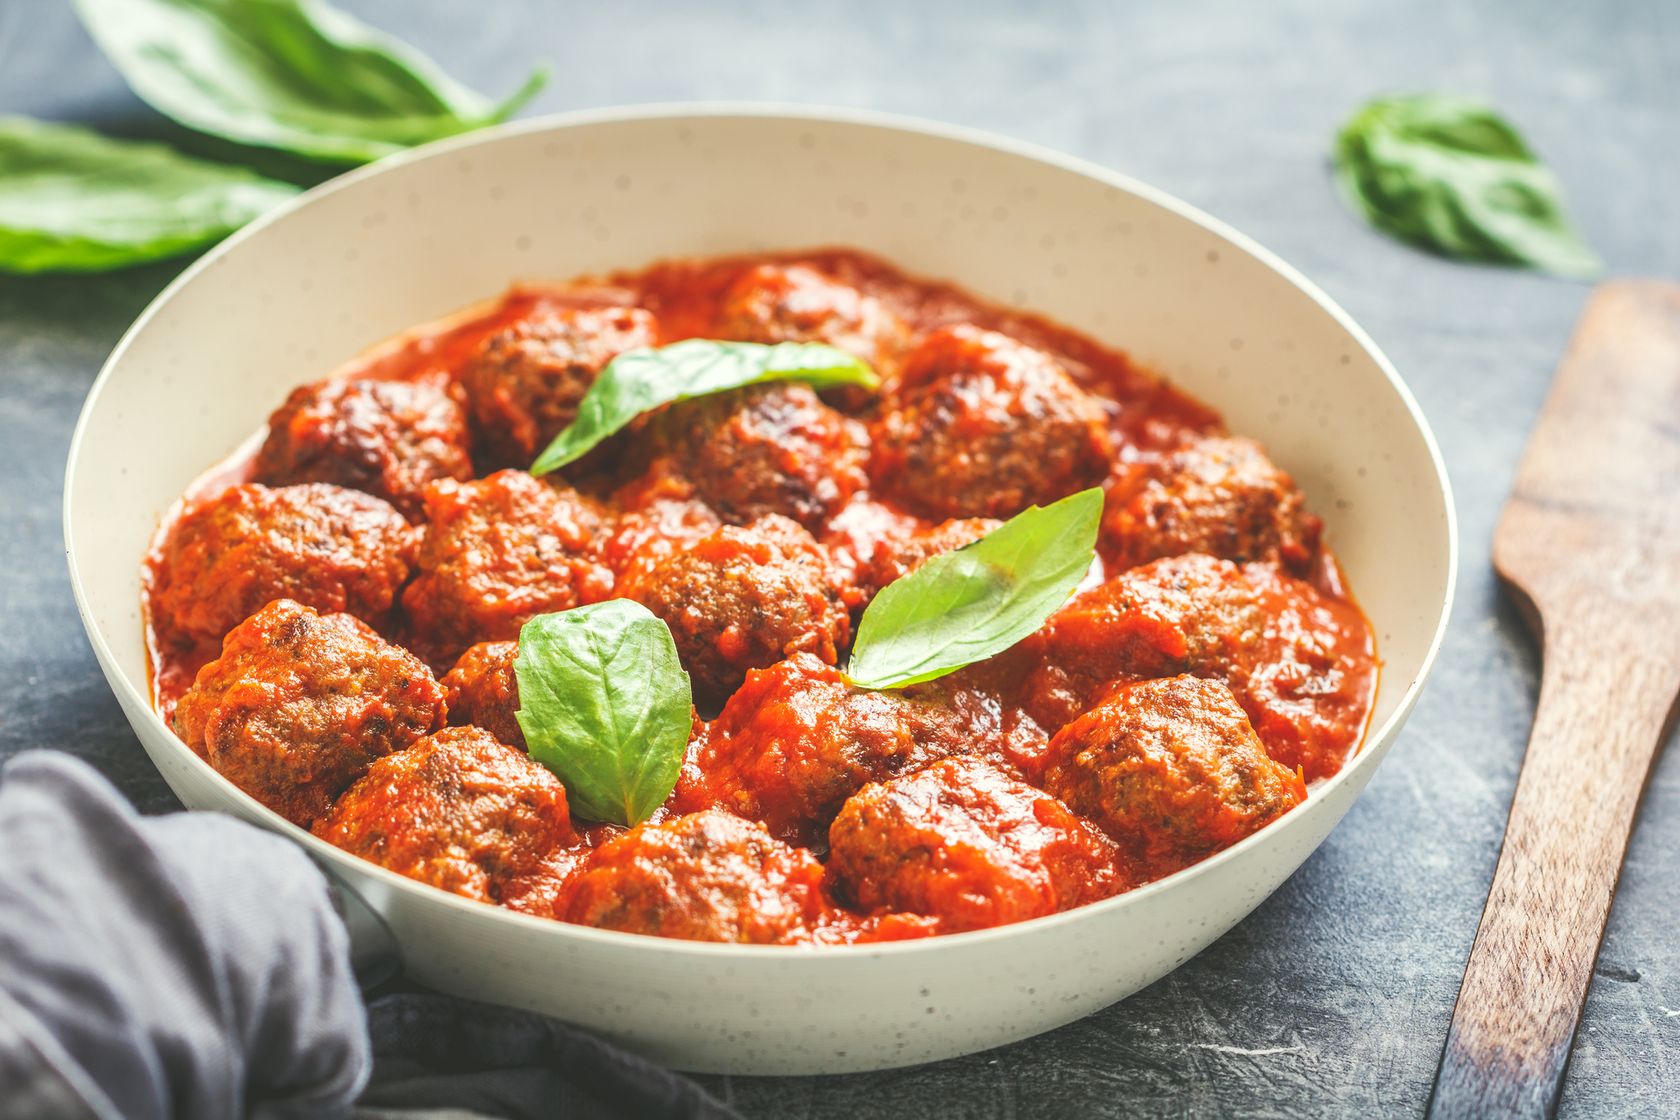 Meatballs Try This Tasty Meatballs Recipe Is Youre Looking To Dinner Inspiration Real Homes 8432